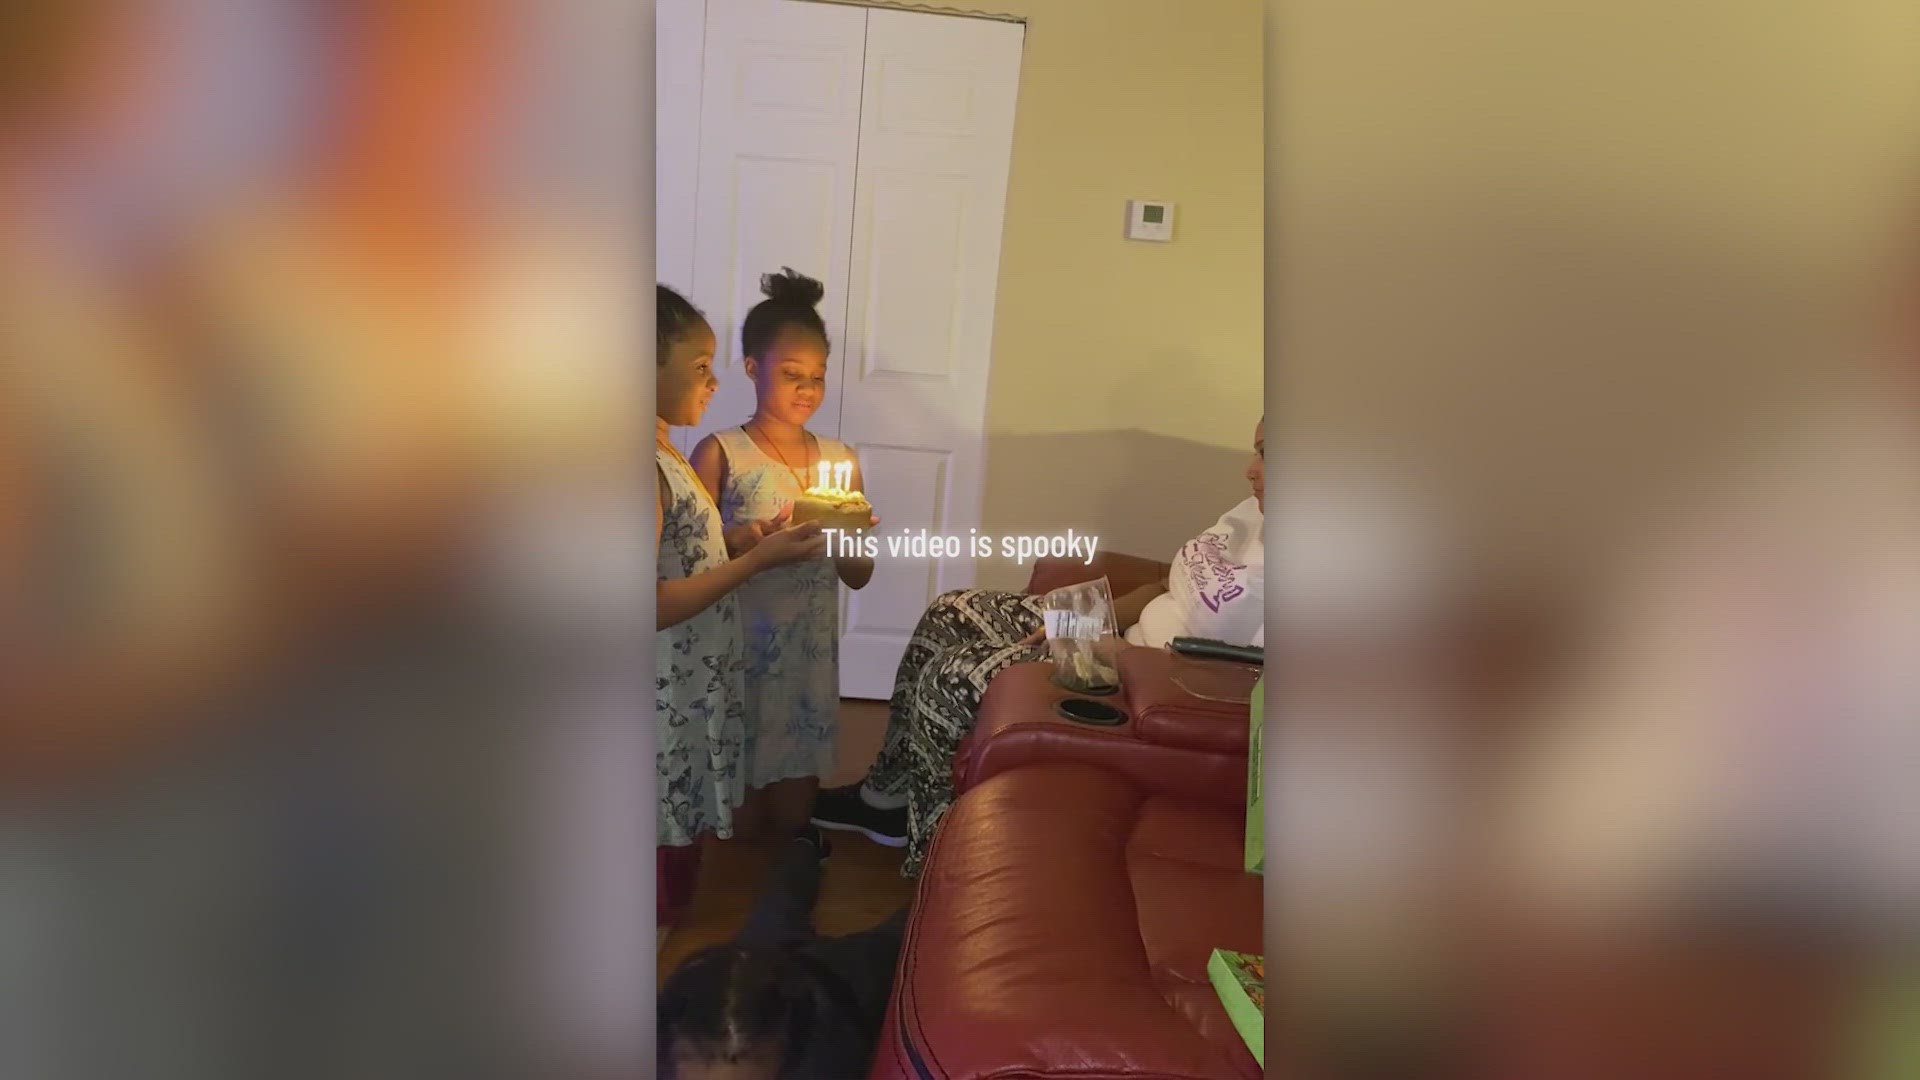 "Marie's Everyday Lif" posted the video on TikTok saying, "My daughters surprised me with a video and it scared me I thought they was about to kill me."